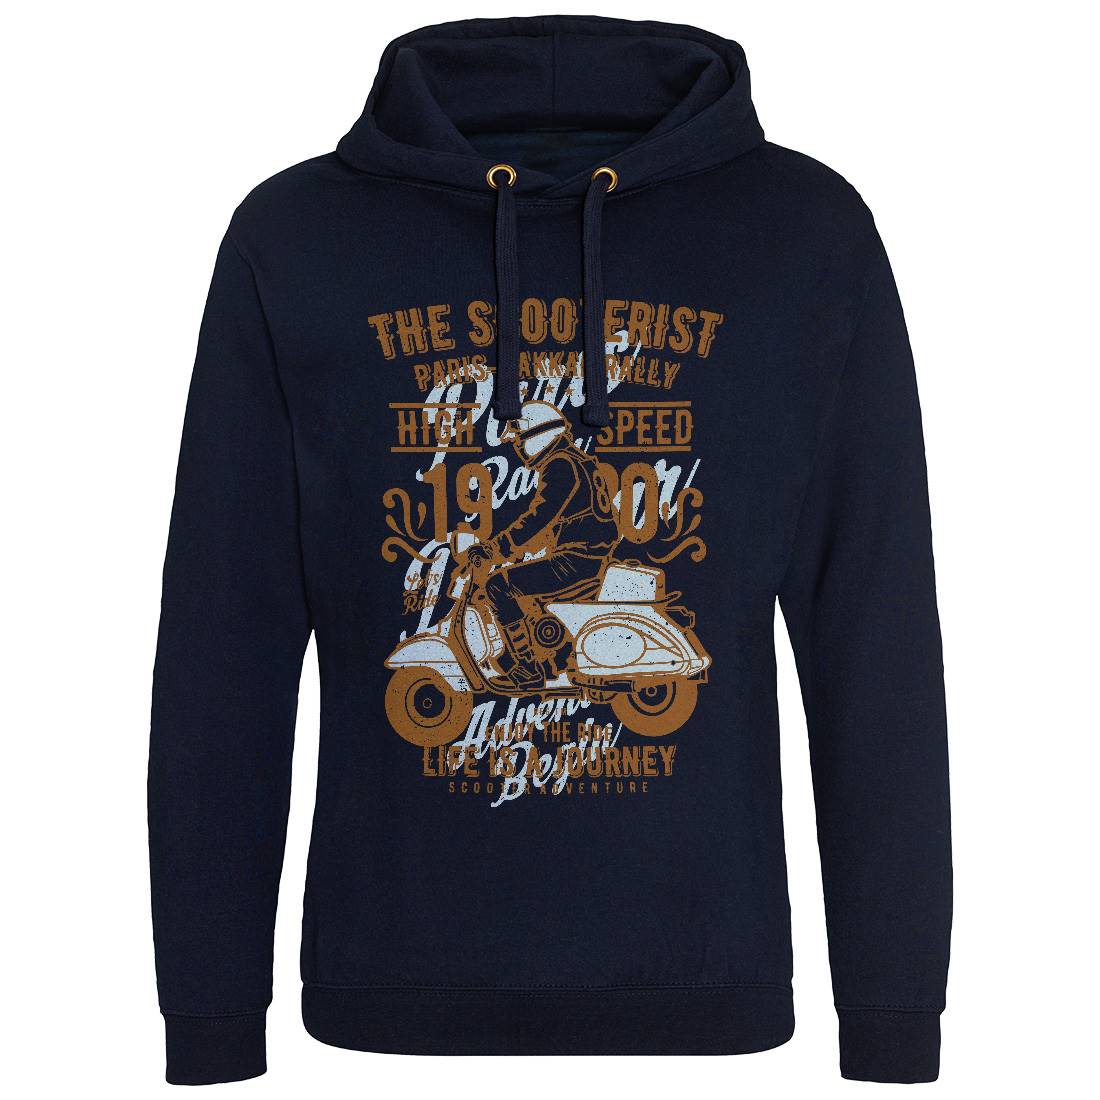 Scooterist 1980 Mens Hoodie Without Pocket Motorcycles A774